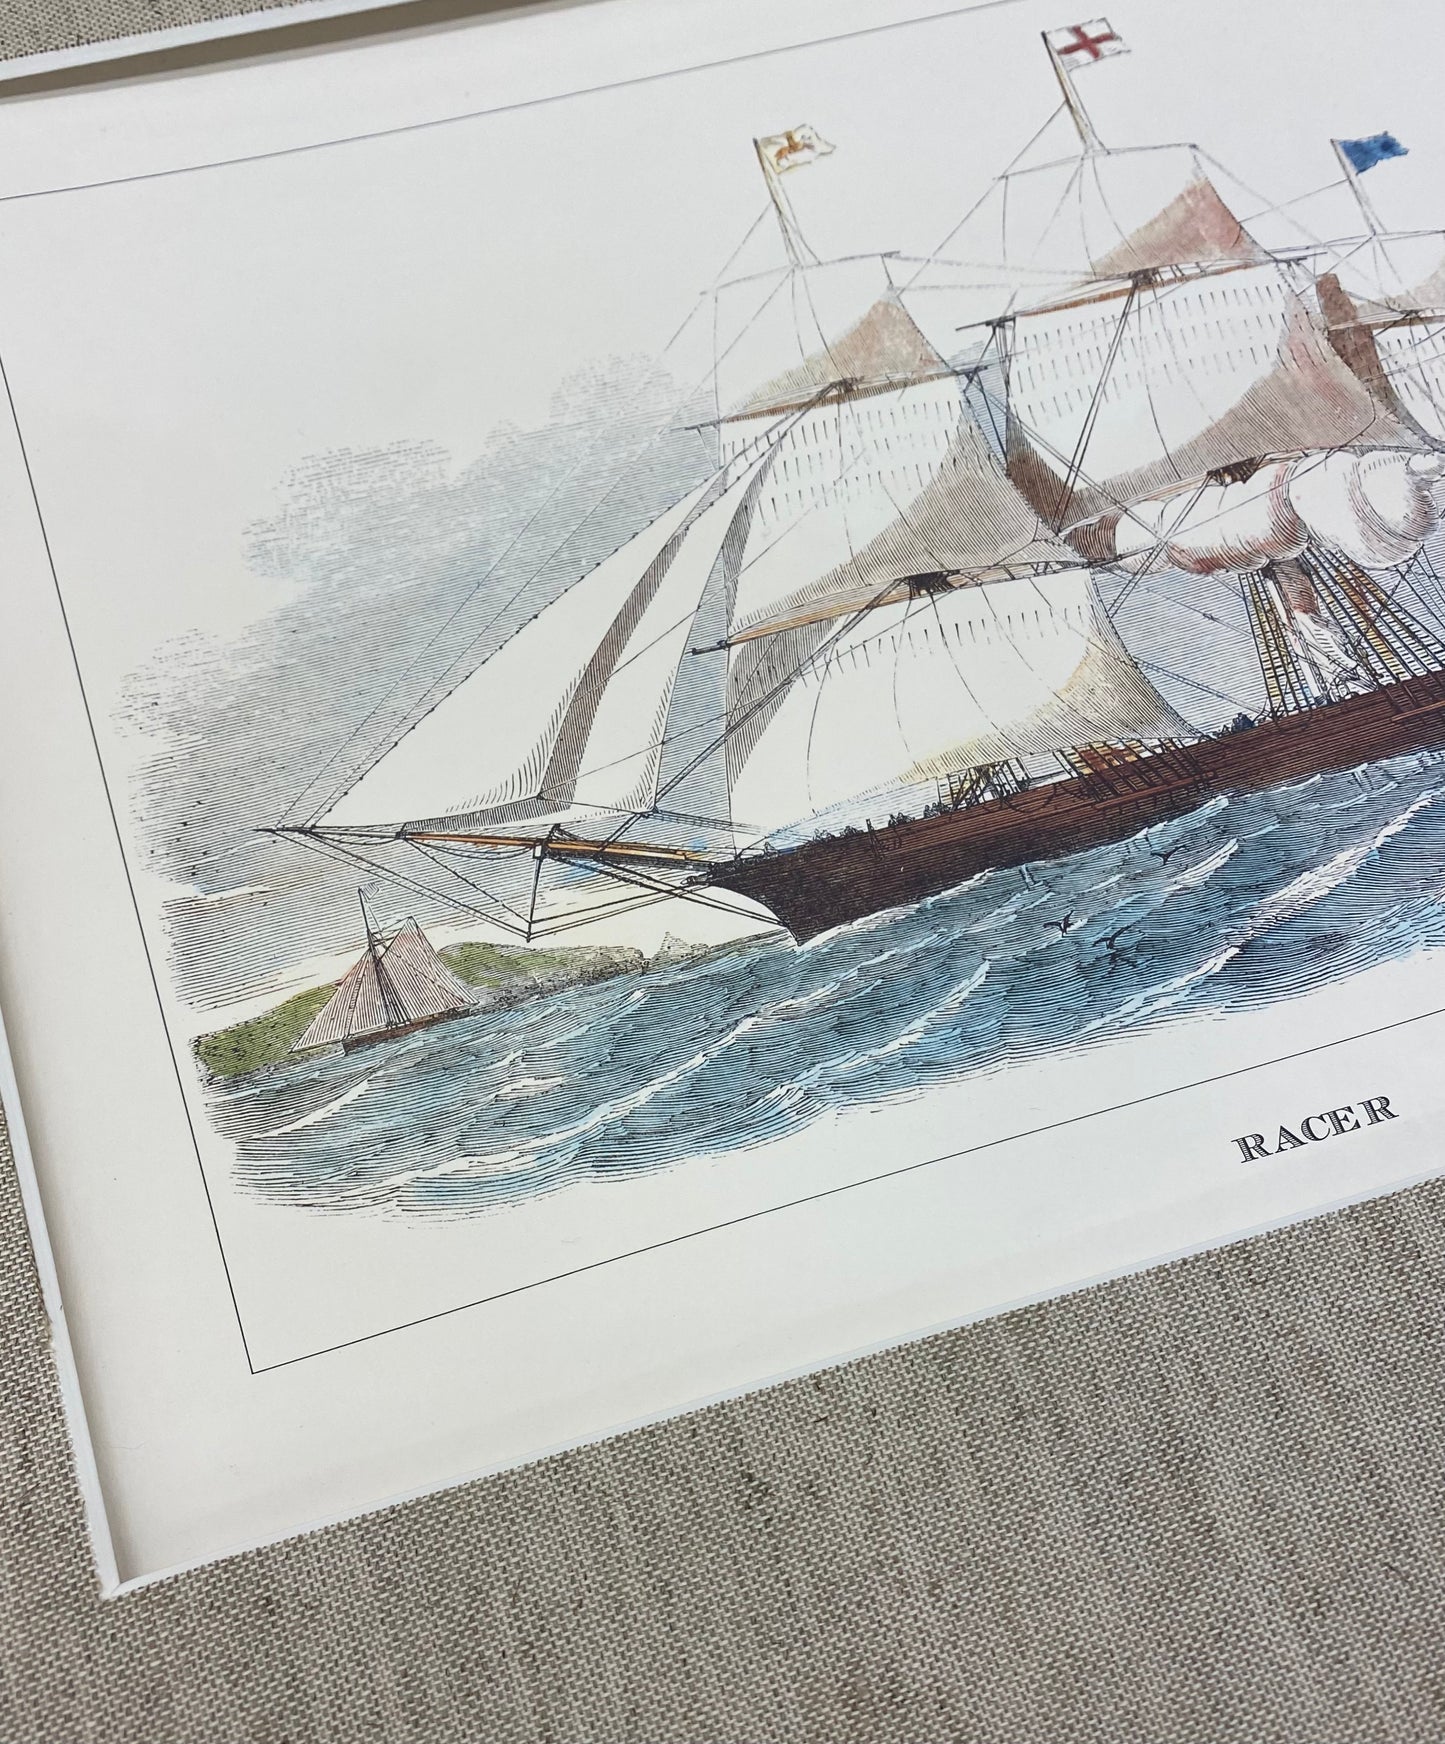 VINTAGE "RACER" SHIP OF THE SEA ETCHING